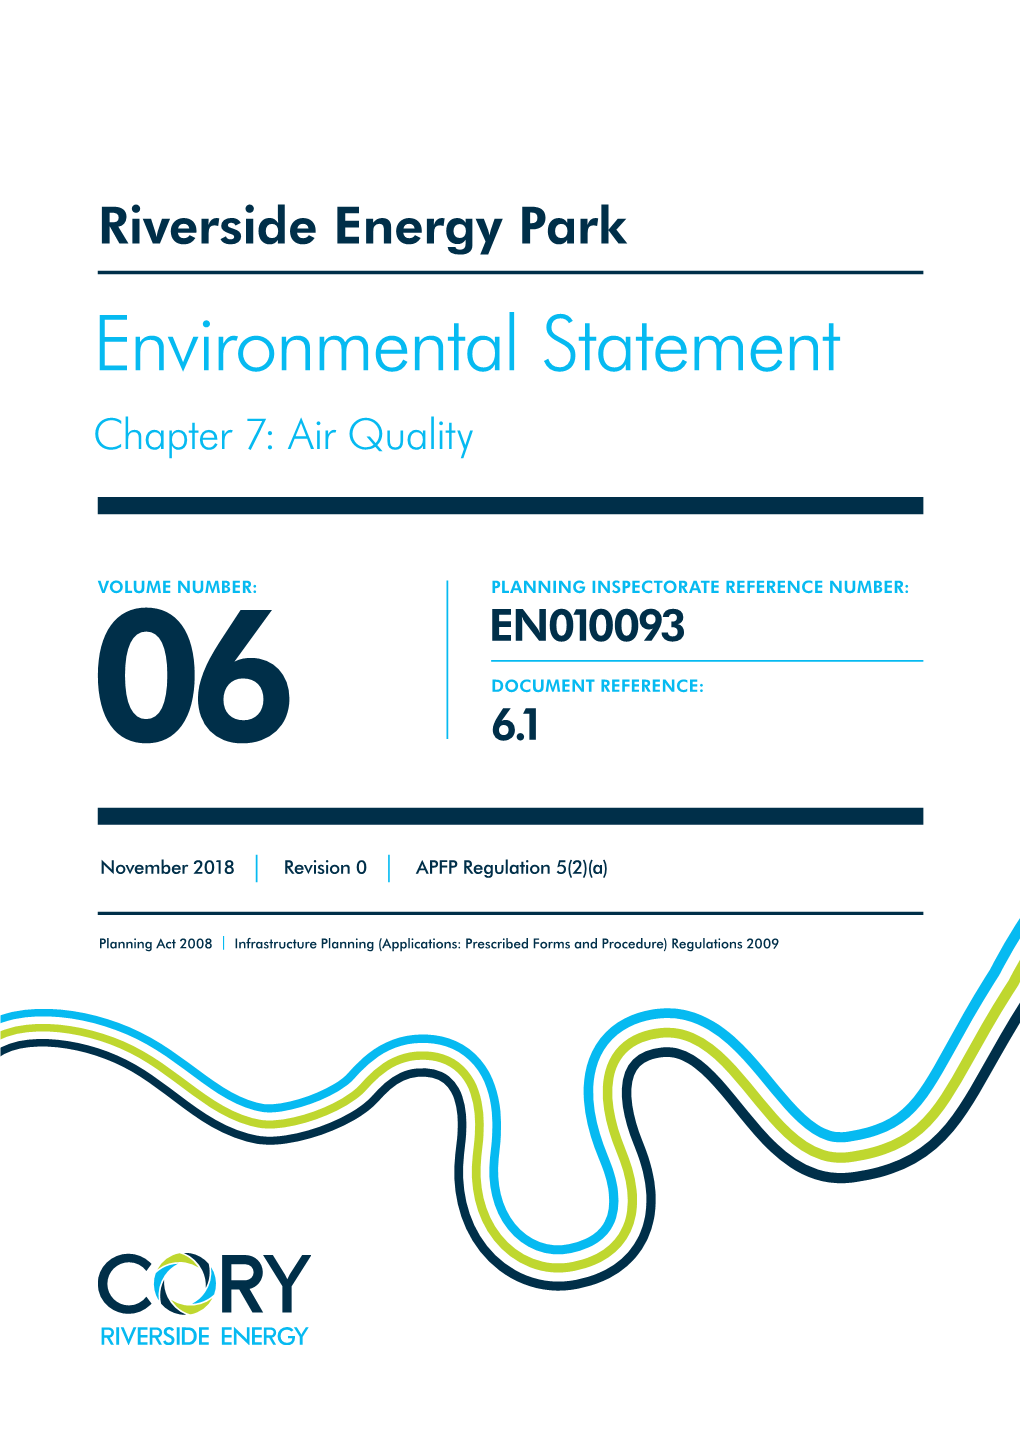 Riverside Energy Park Environmental Statement Chapter 7: Air Quality